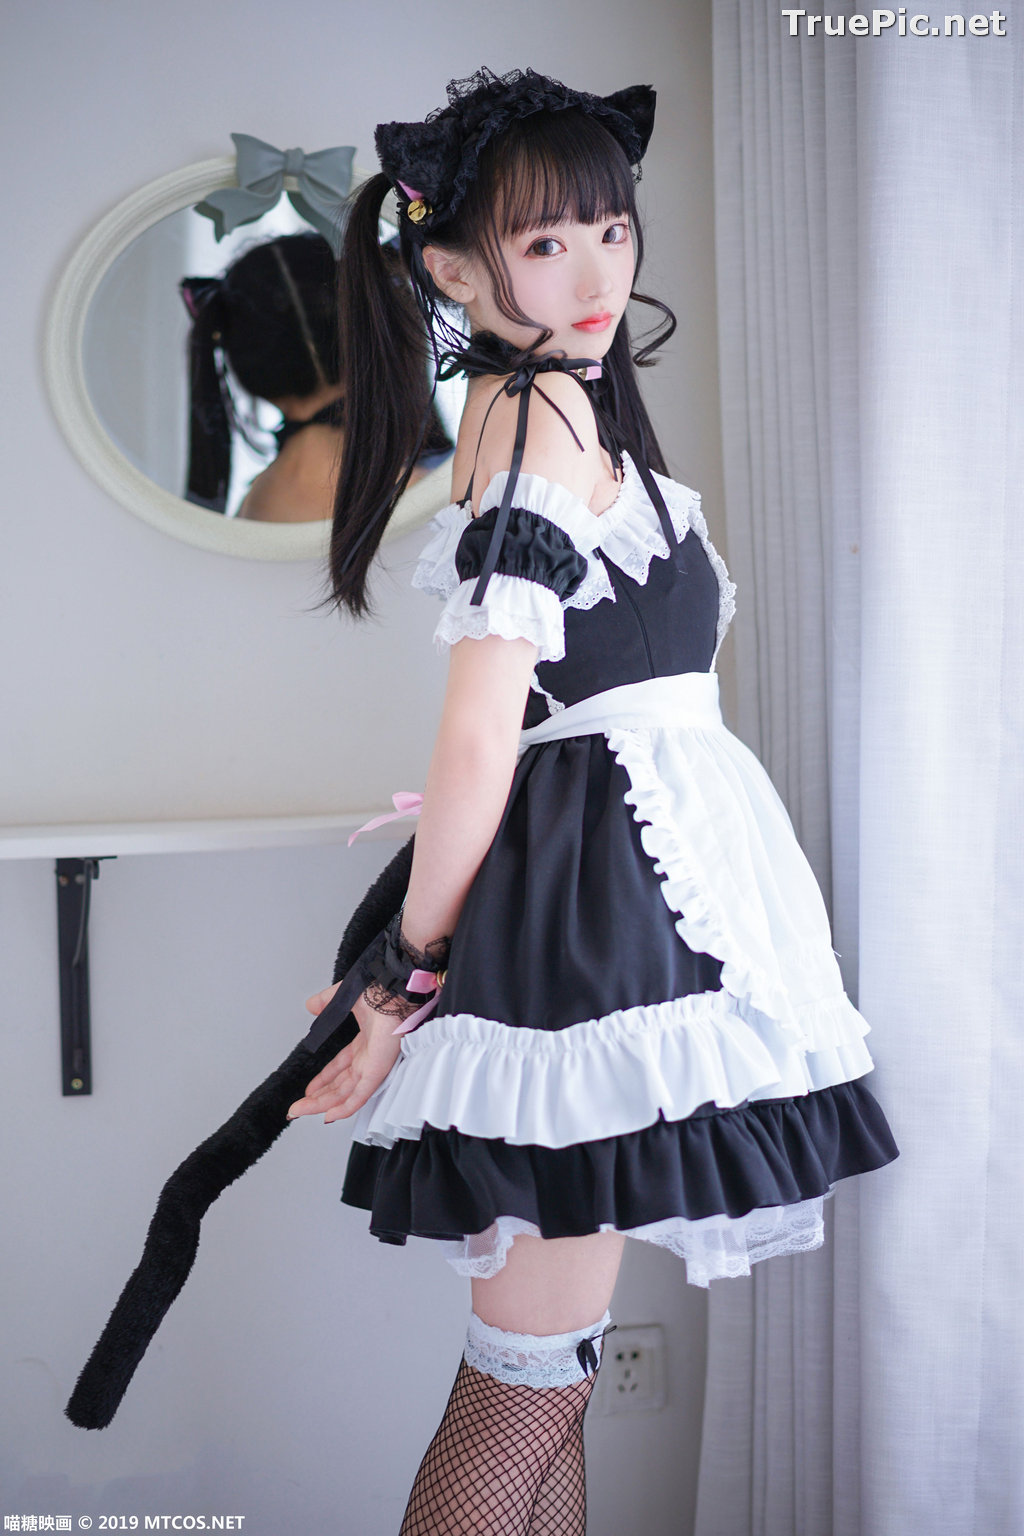 Image [MTCos] 喵糖映画 Vol.051 - Chinese Cute Model - Lovely Maid Cat - TruePic.net - Picture-13